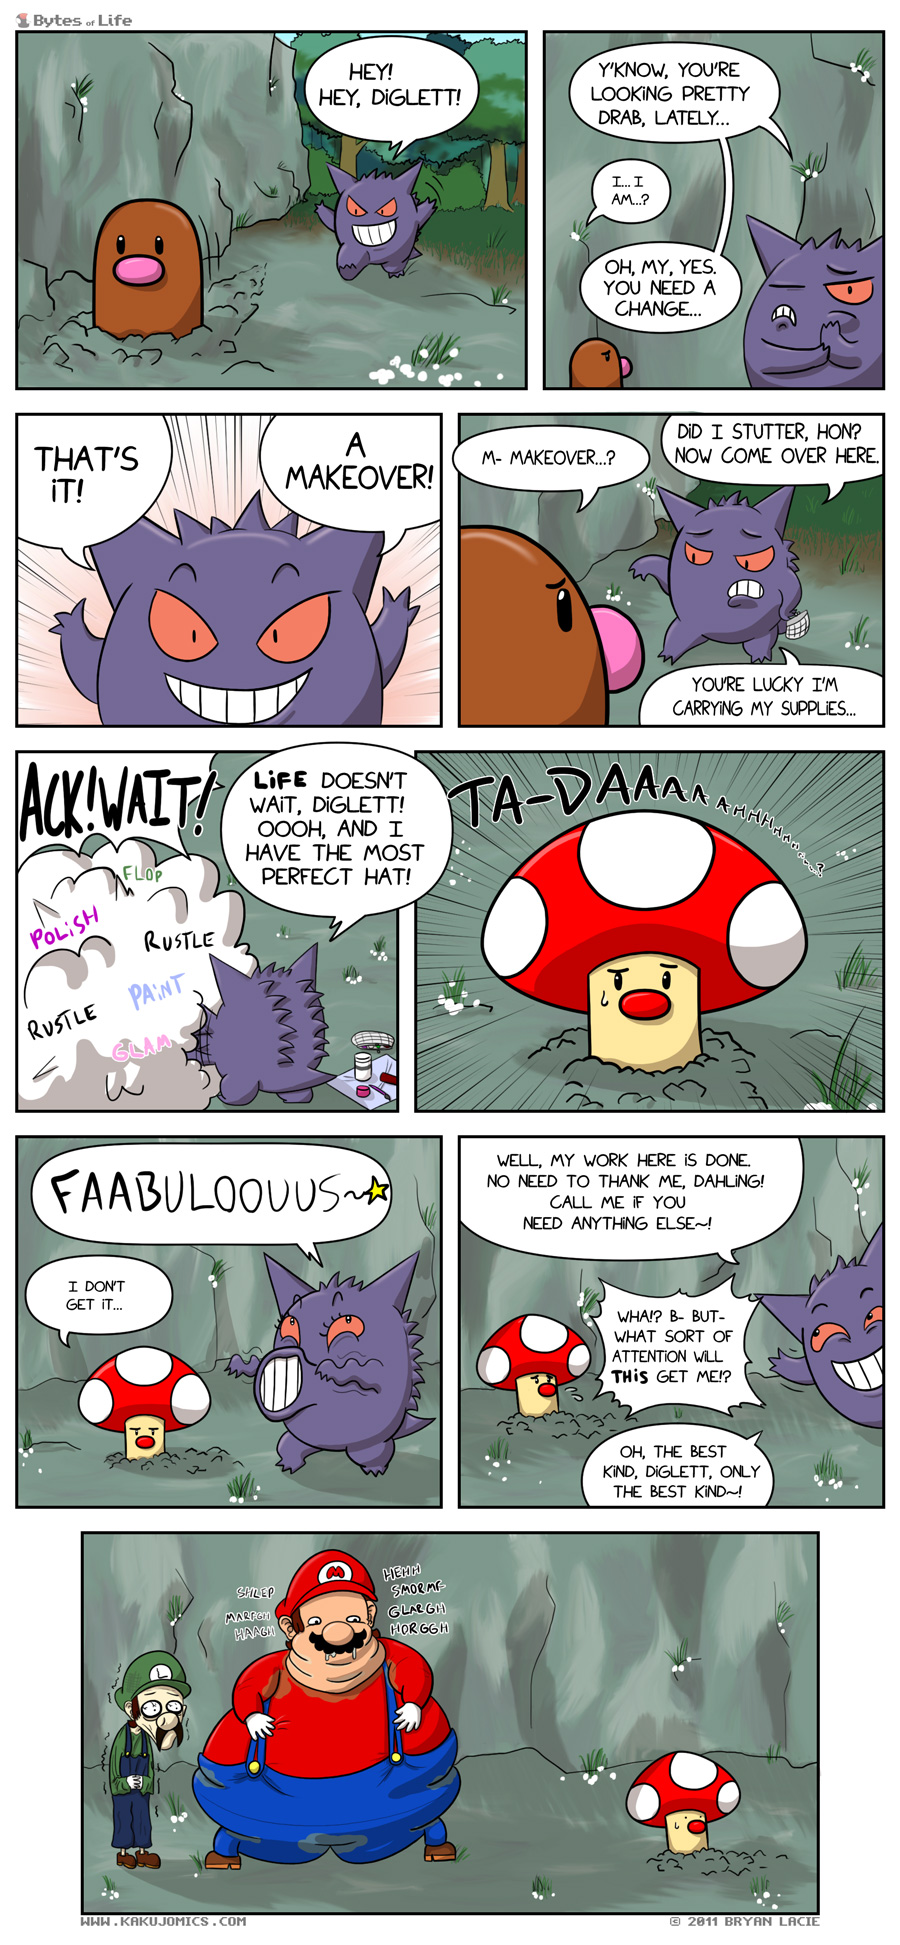 I guess you could say... *sunglasses* Diglett is in a Ghastly predicament...